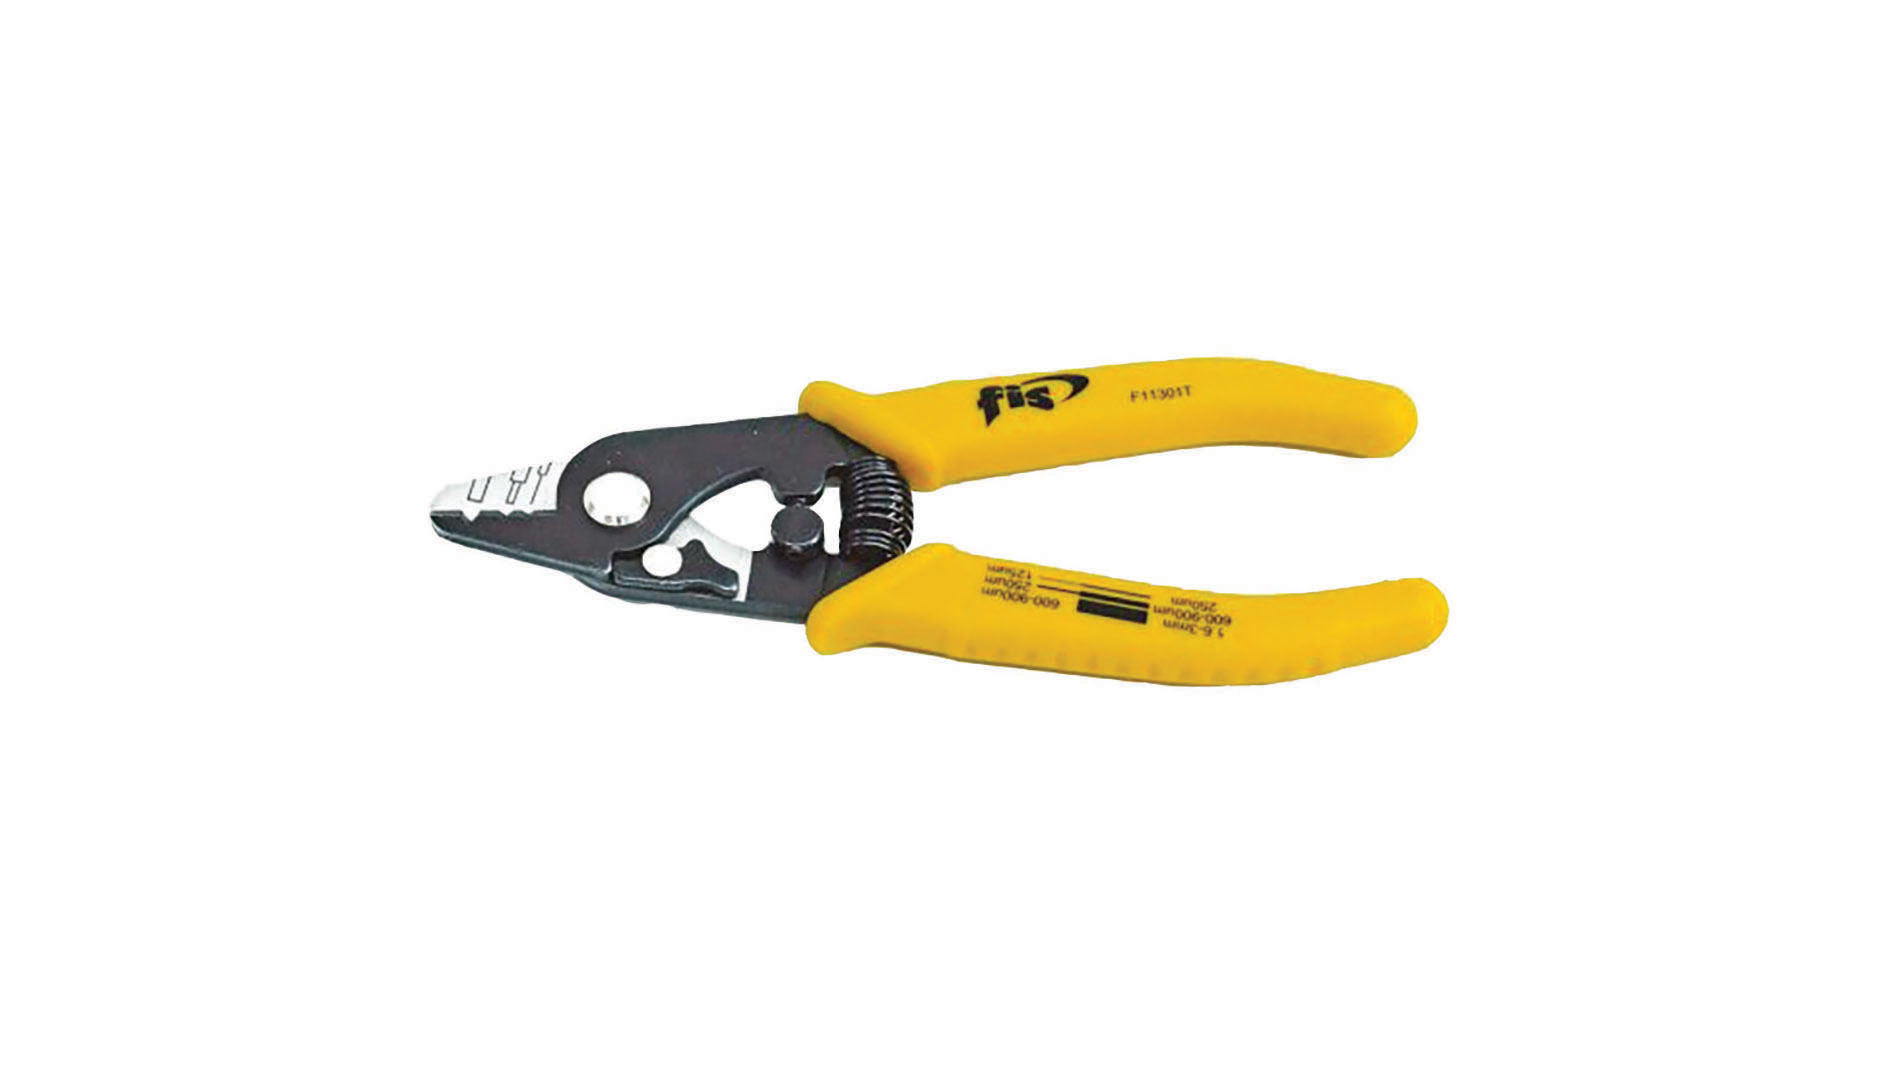 Cable stripper with yellow handles. Image by Fiber Instrument Sales.